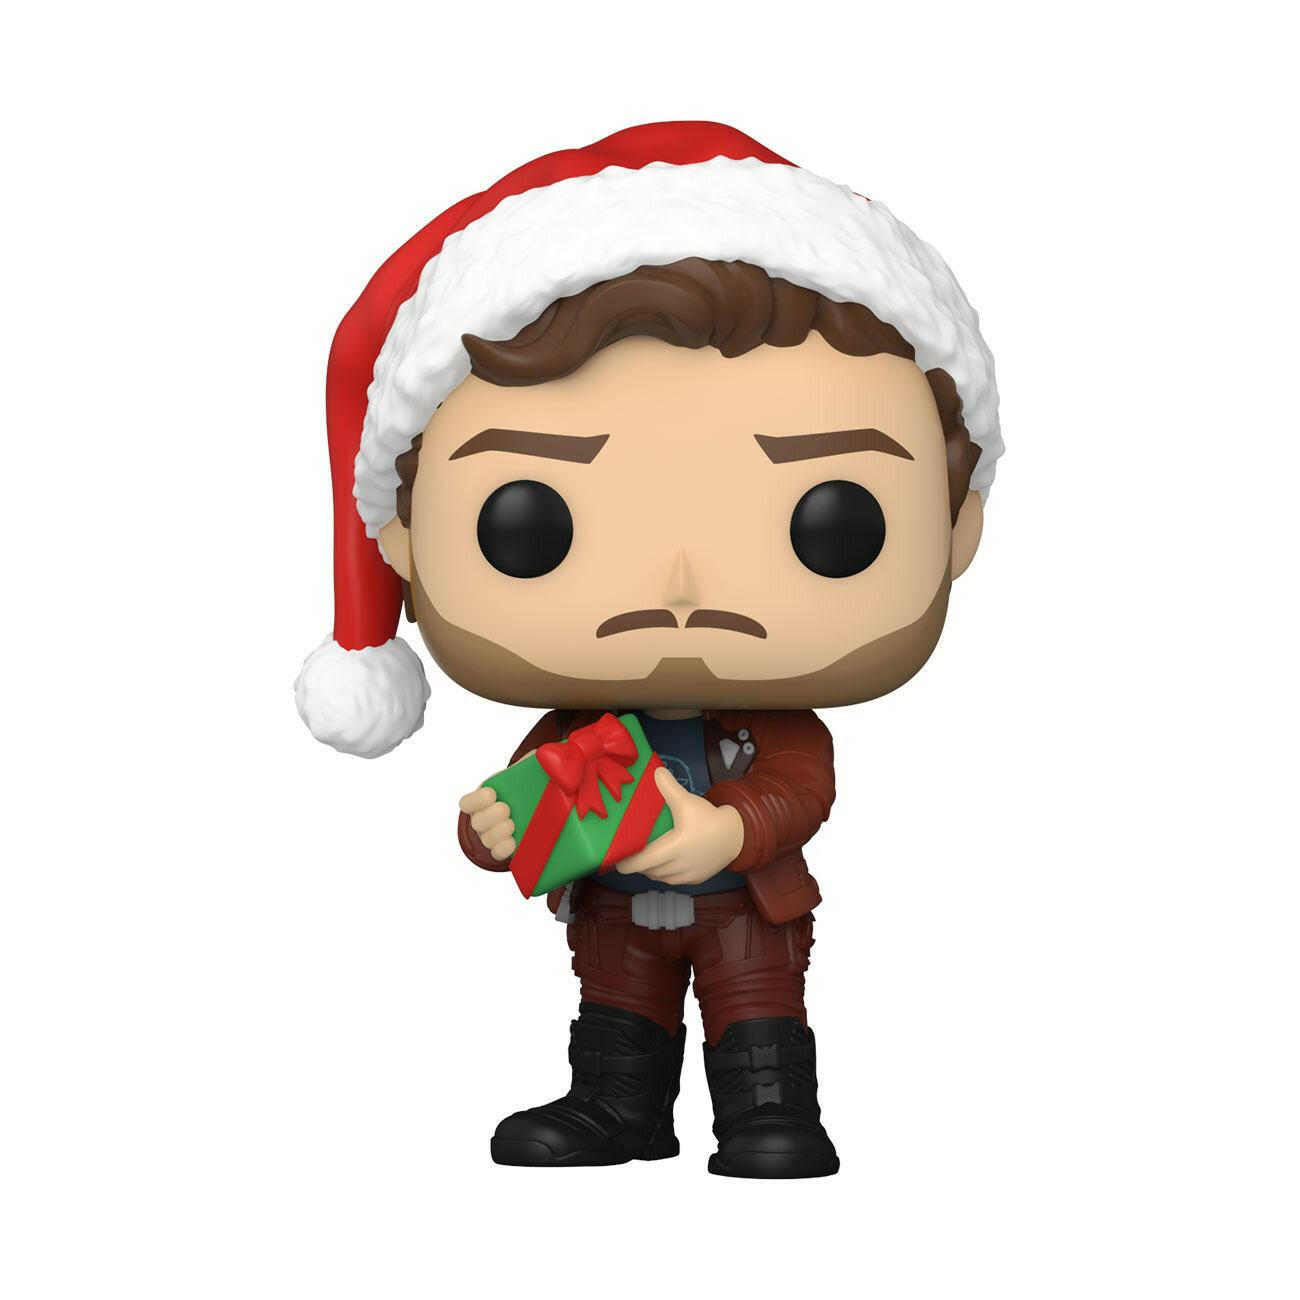 Funko Pop! Marvel 1104 Guardians of the Galaxy Holiday Special Star-Lord 9cm Funko